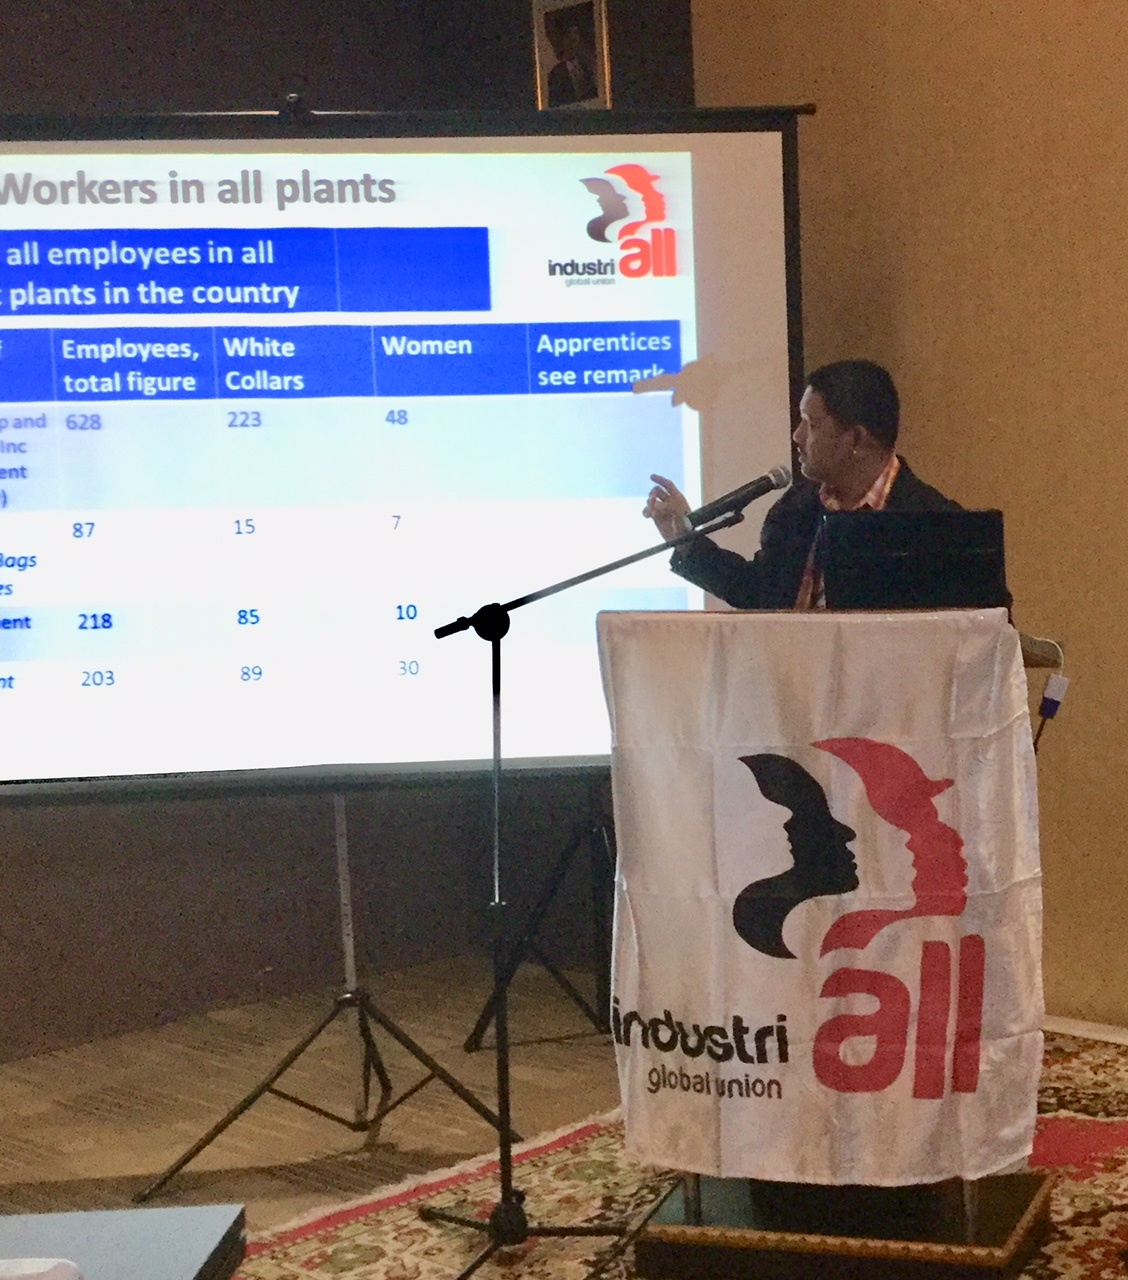 South East Asia cement unions call for sustainable future | IndustriALL